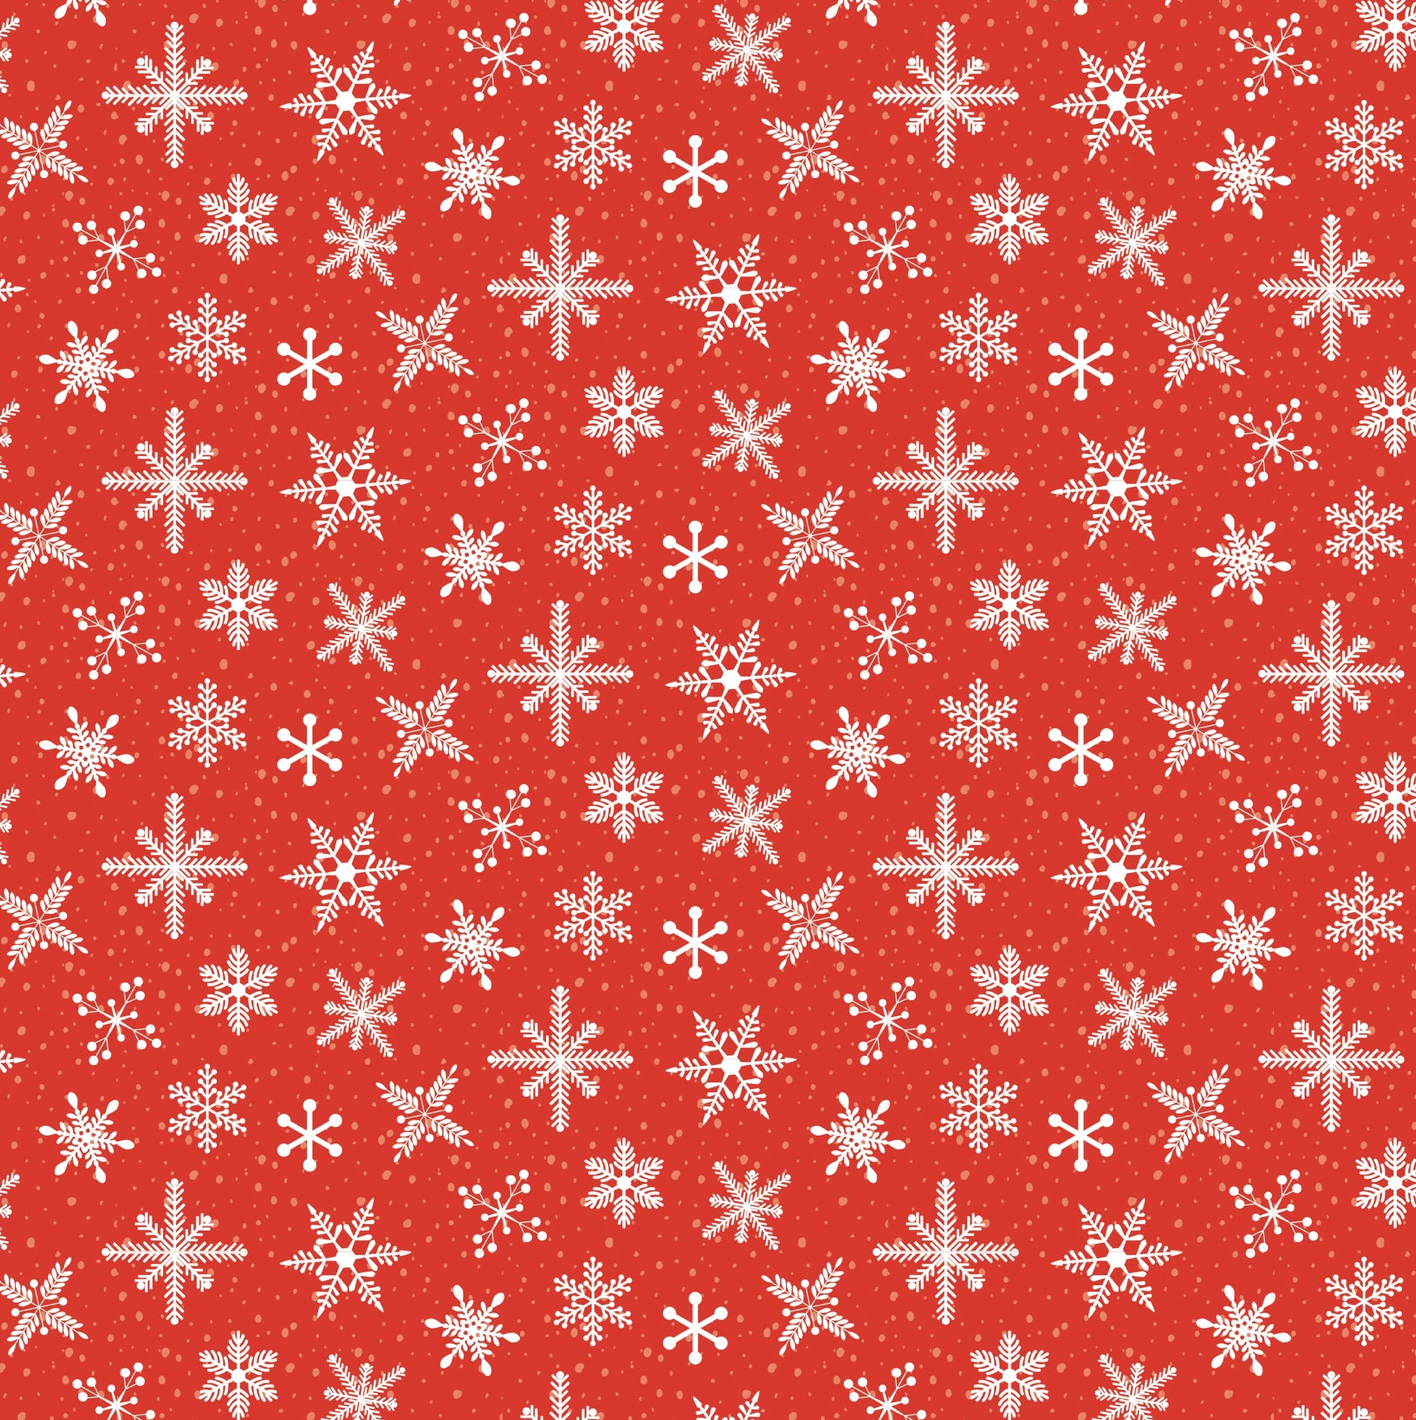 Prairie Christmas, Snowfall Red, PC24351, sold by the 1/2 yard, *PREORDER